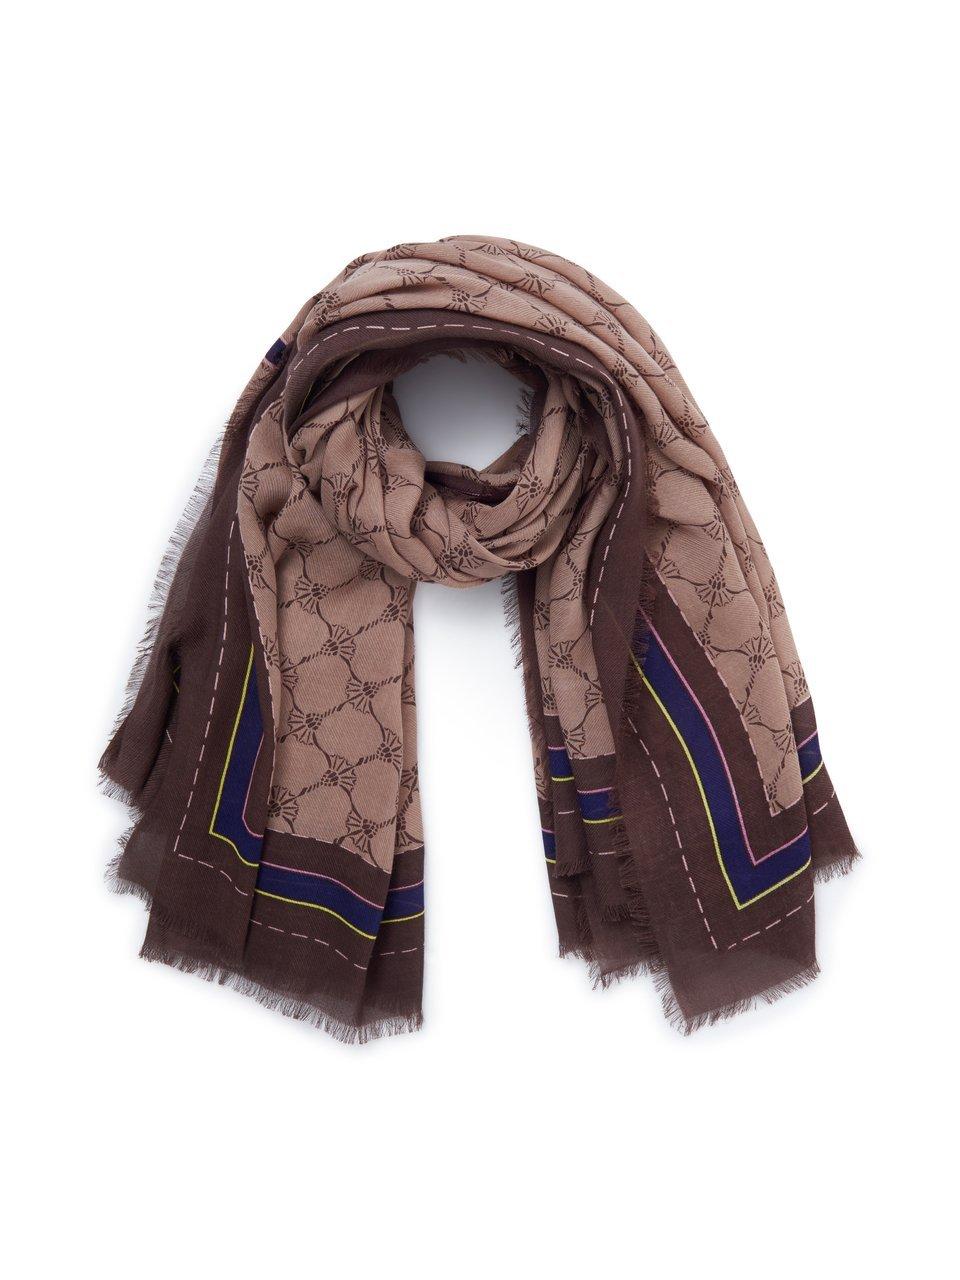 Gucci Tiger GG Print Wool Scarf in Natural for Men